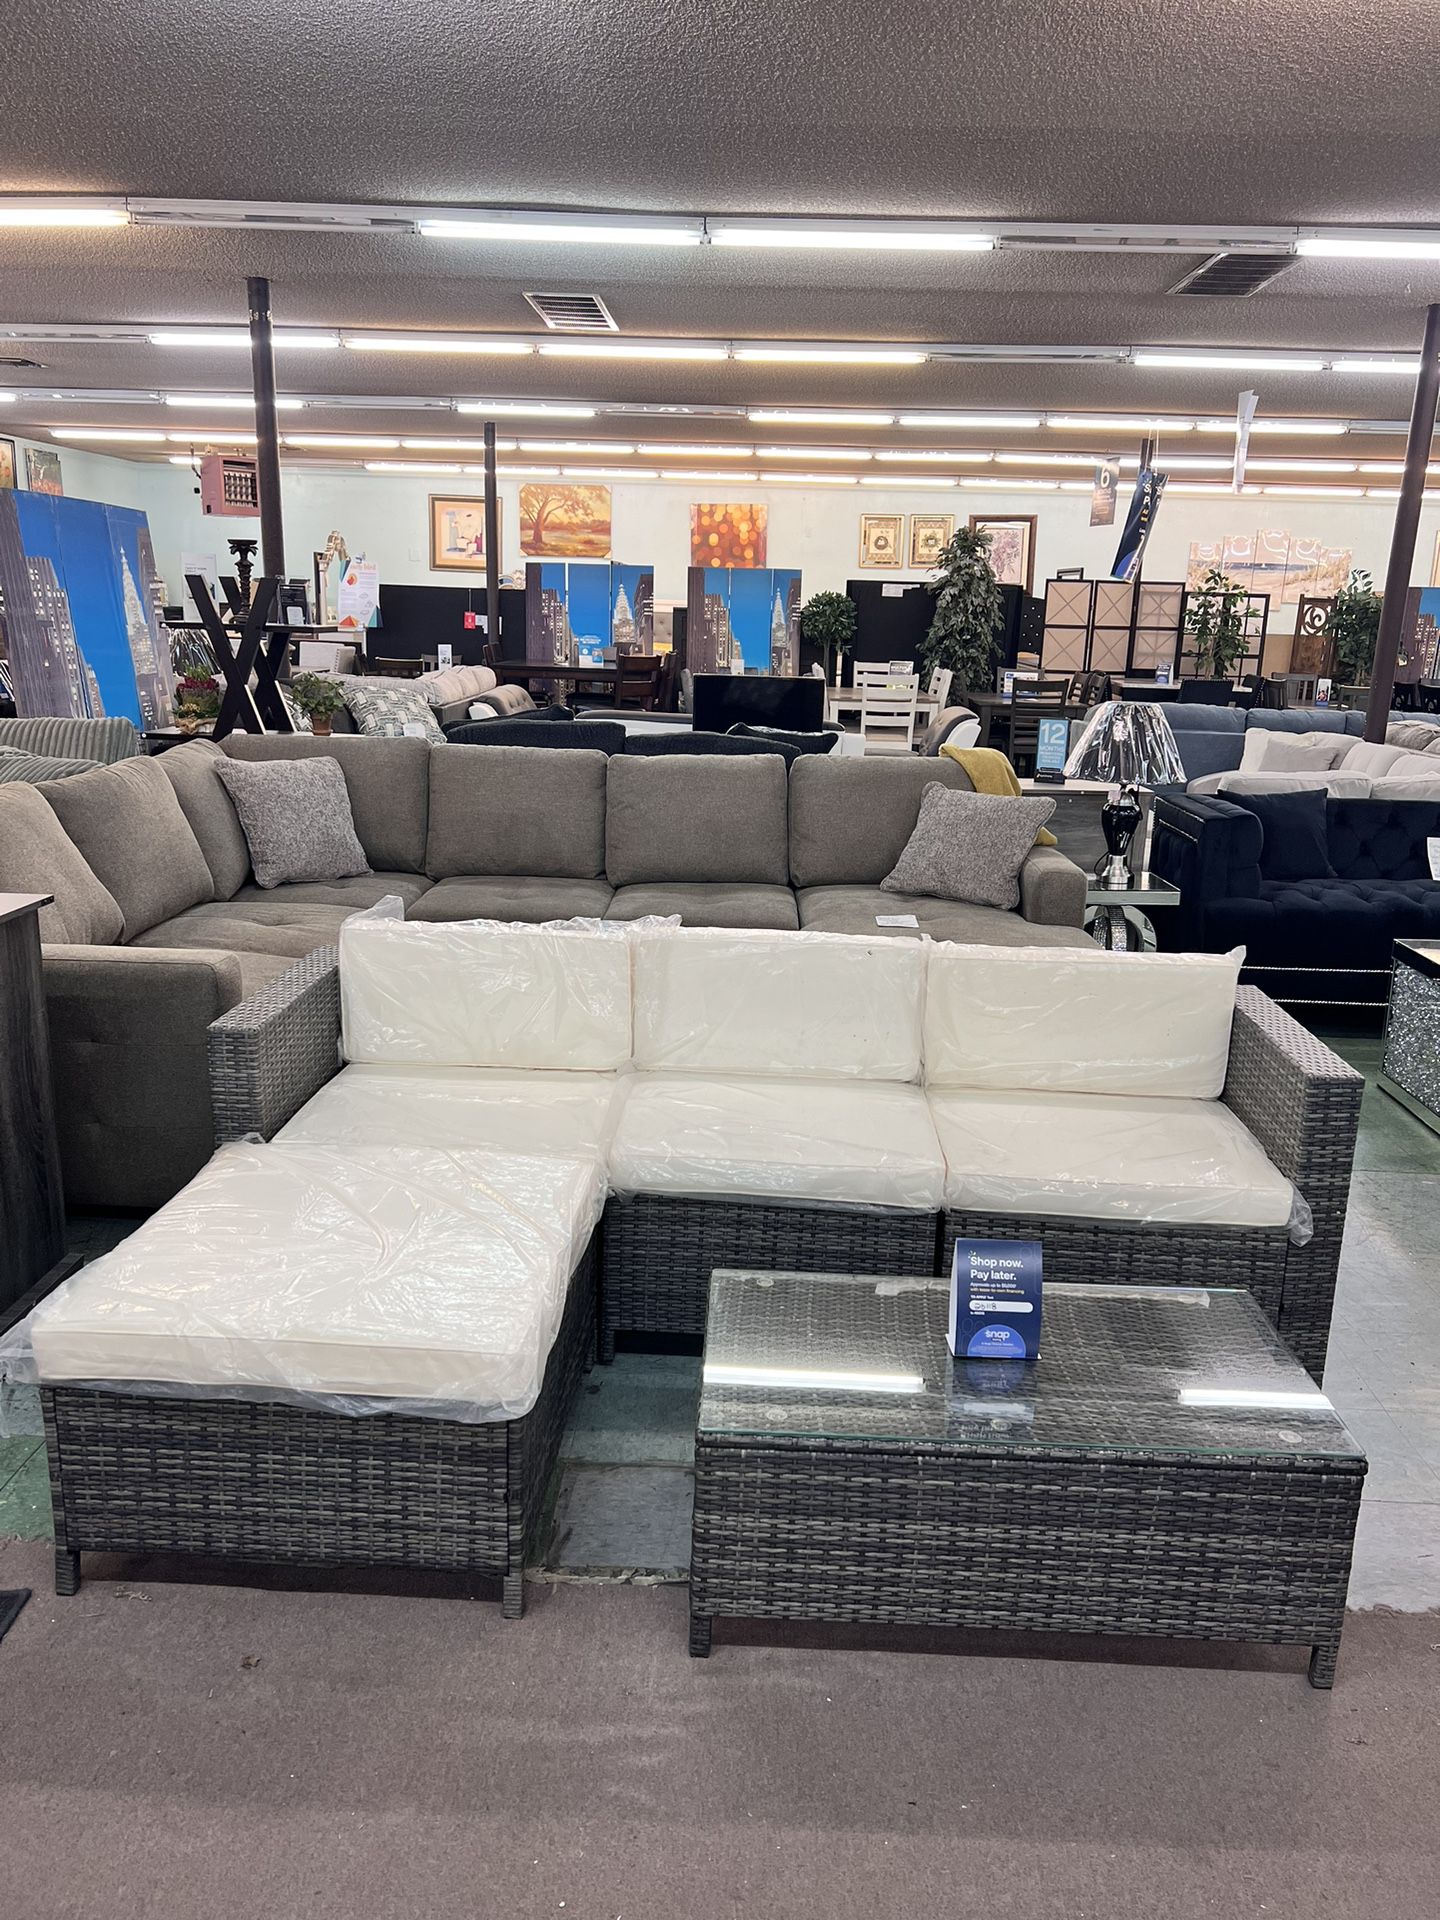 🔥Flash Deal🔥Brand New 4pc Patio Sectional With Coffee Table 